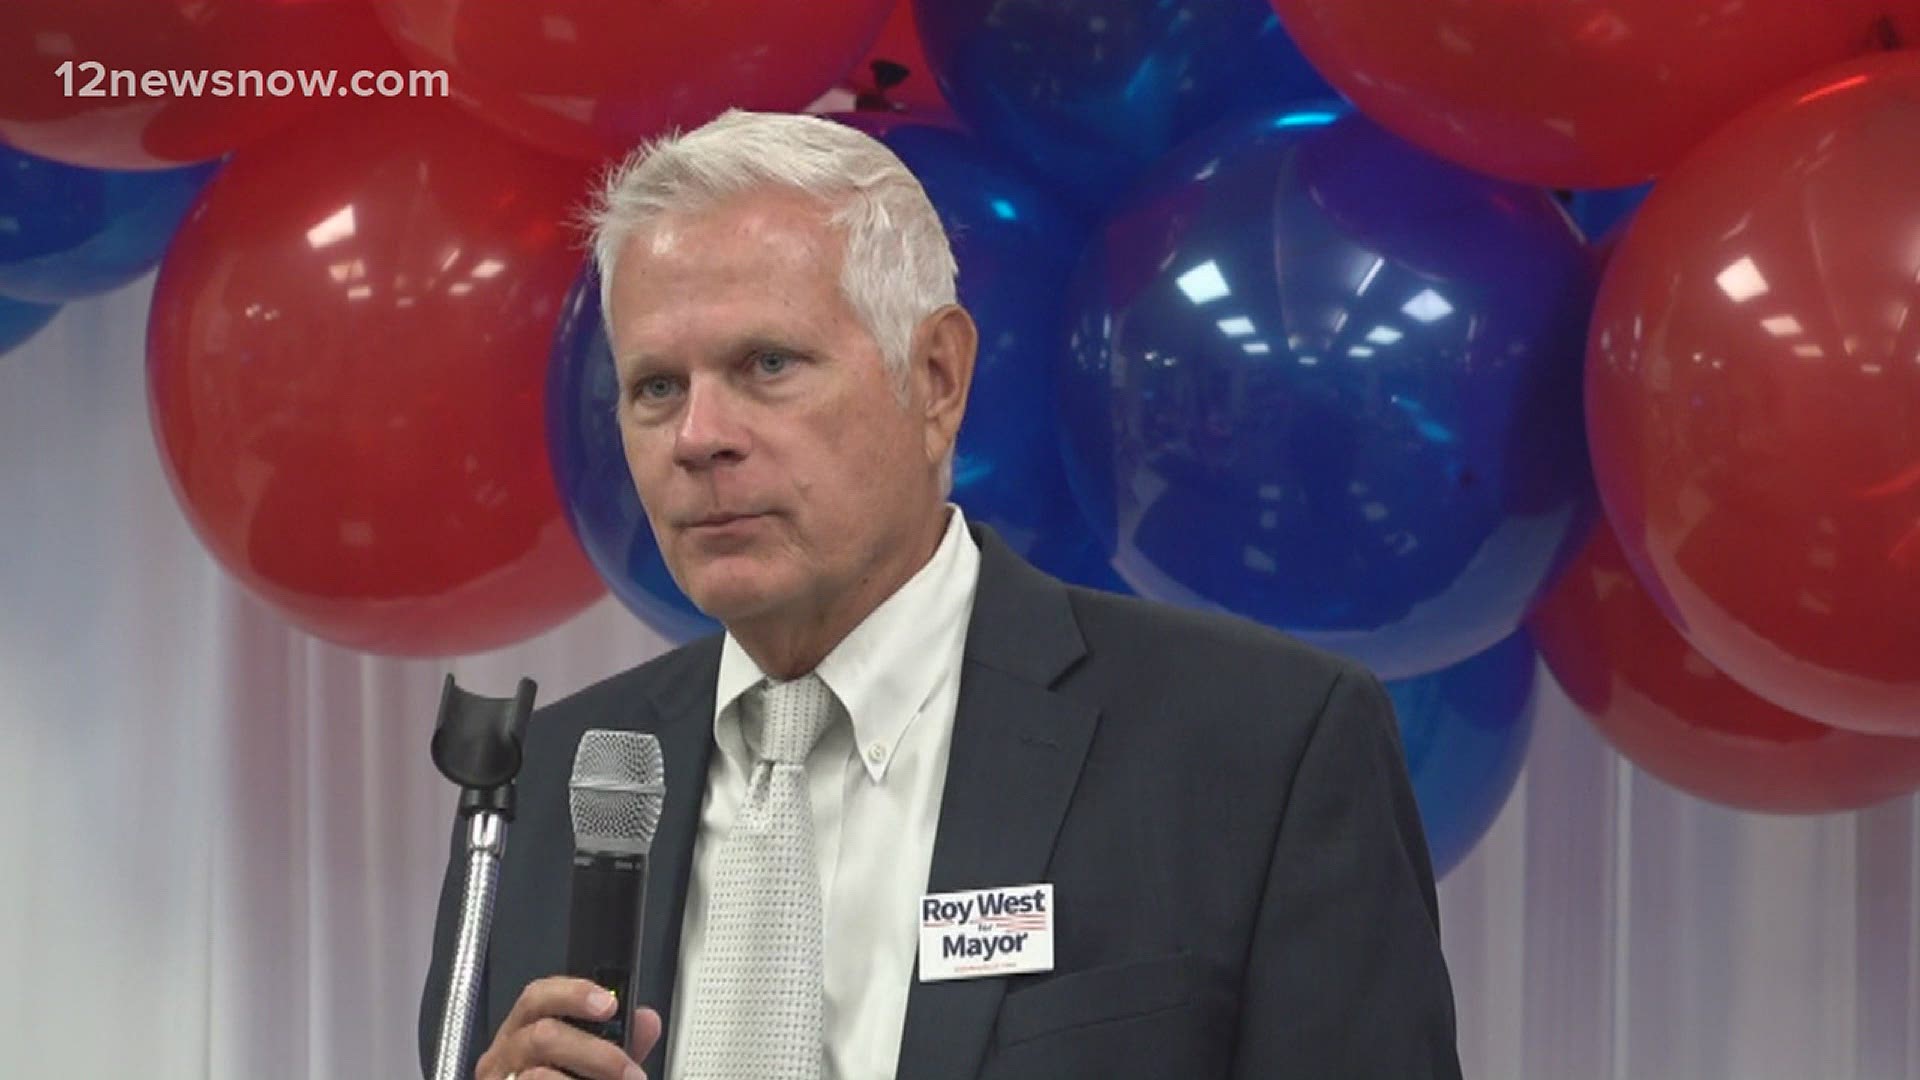 Roy West conceded the race to Robin Mouton in a runoff to become Beaumont's next mayor.